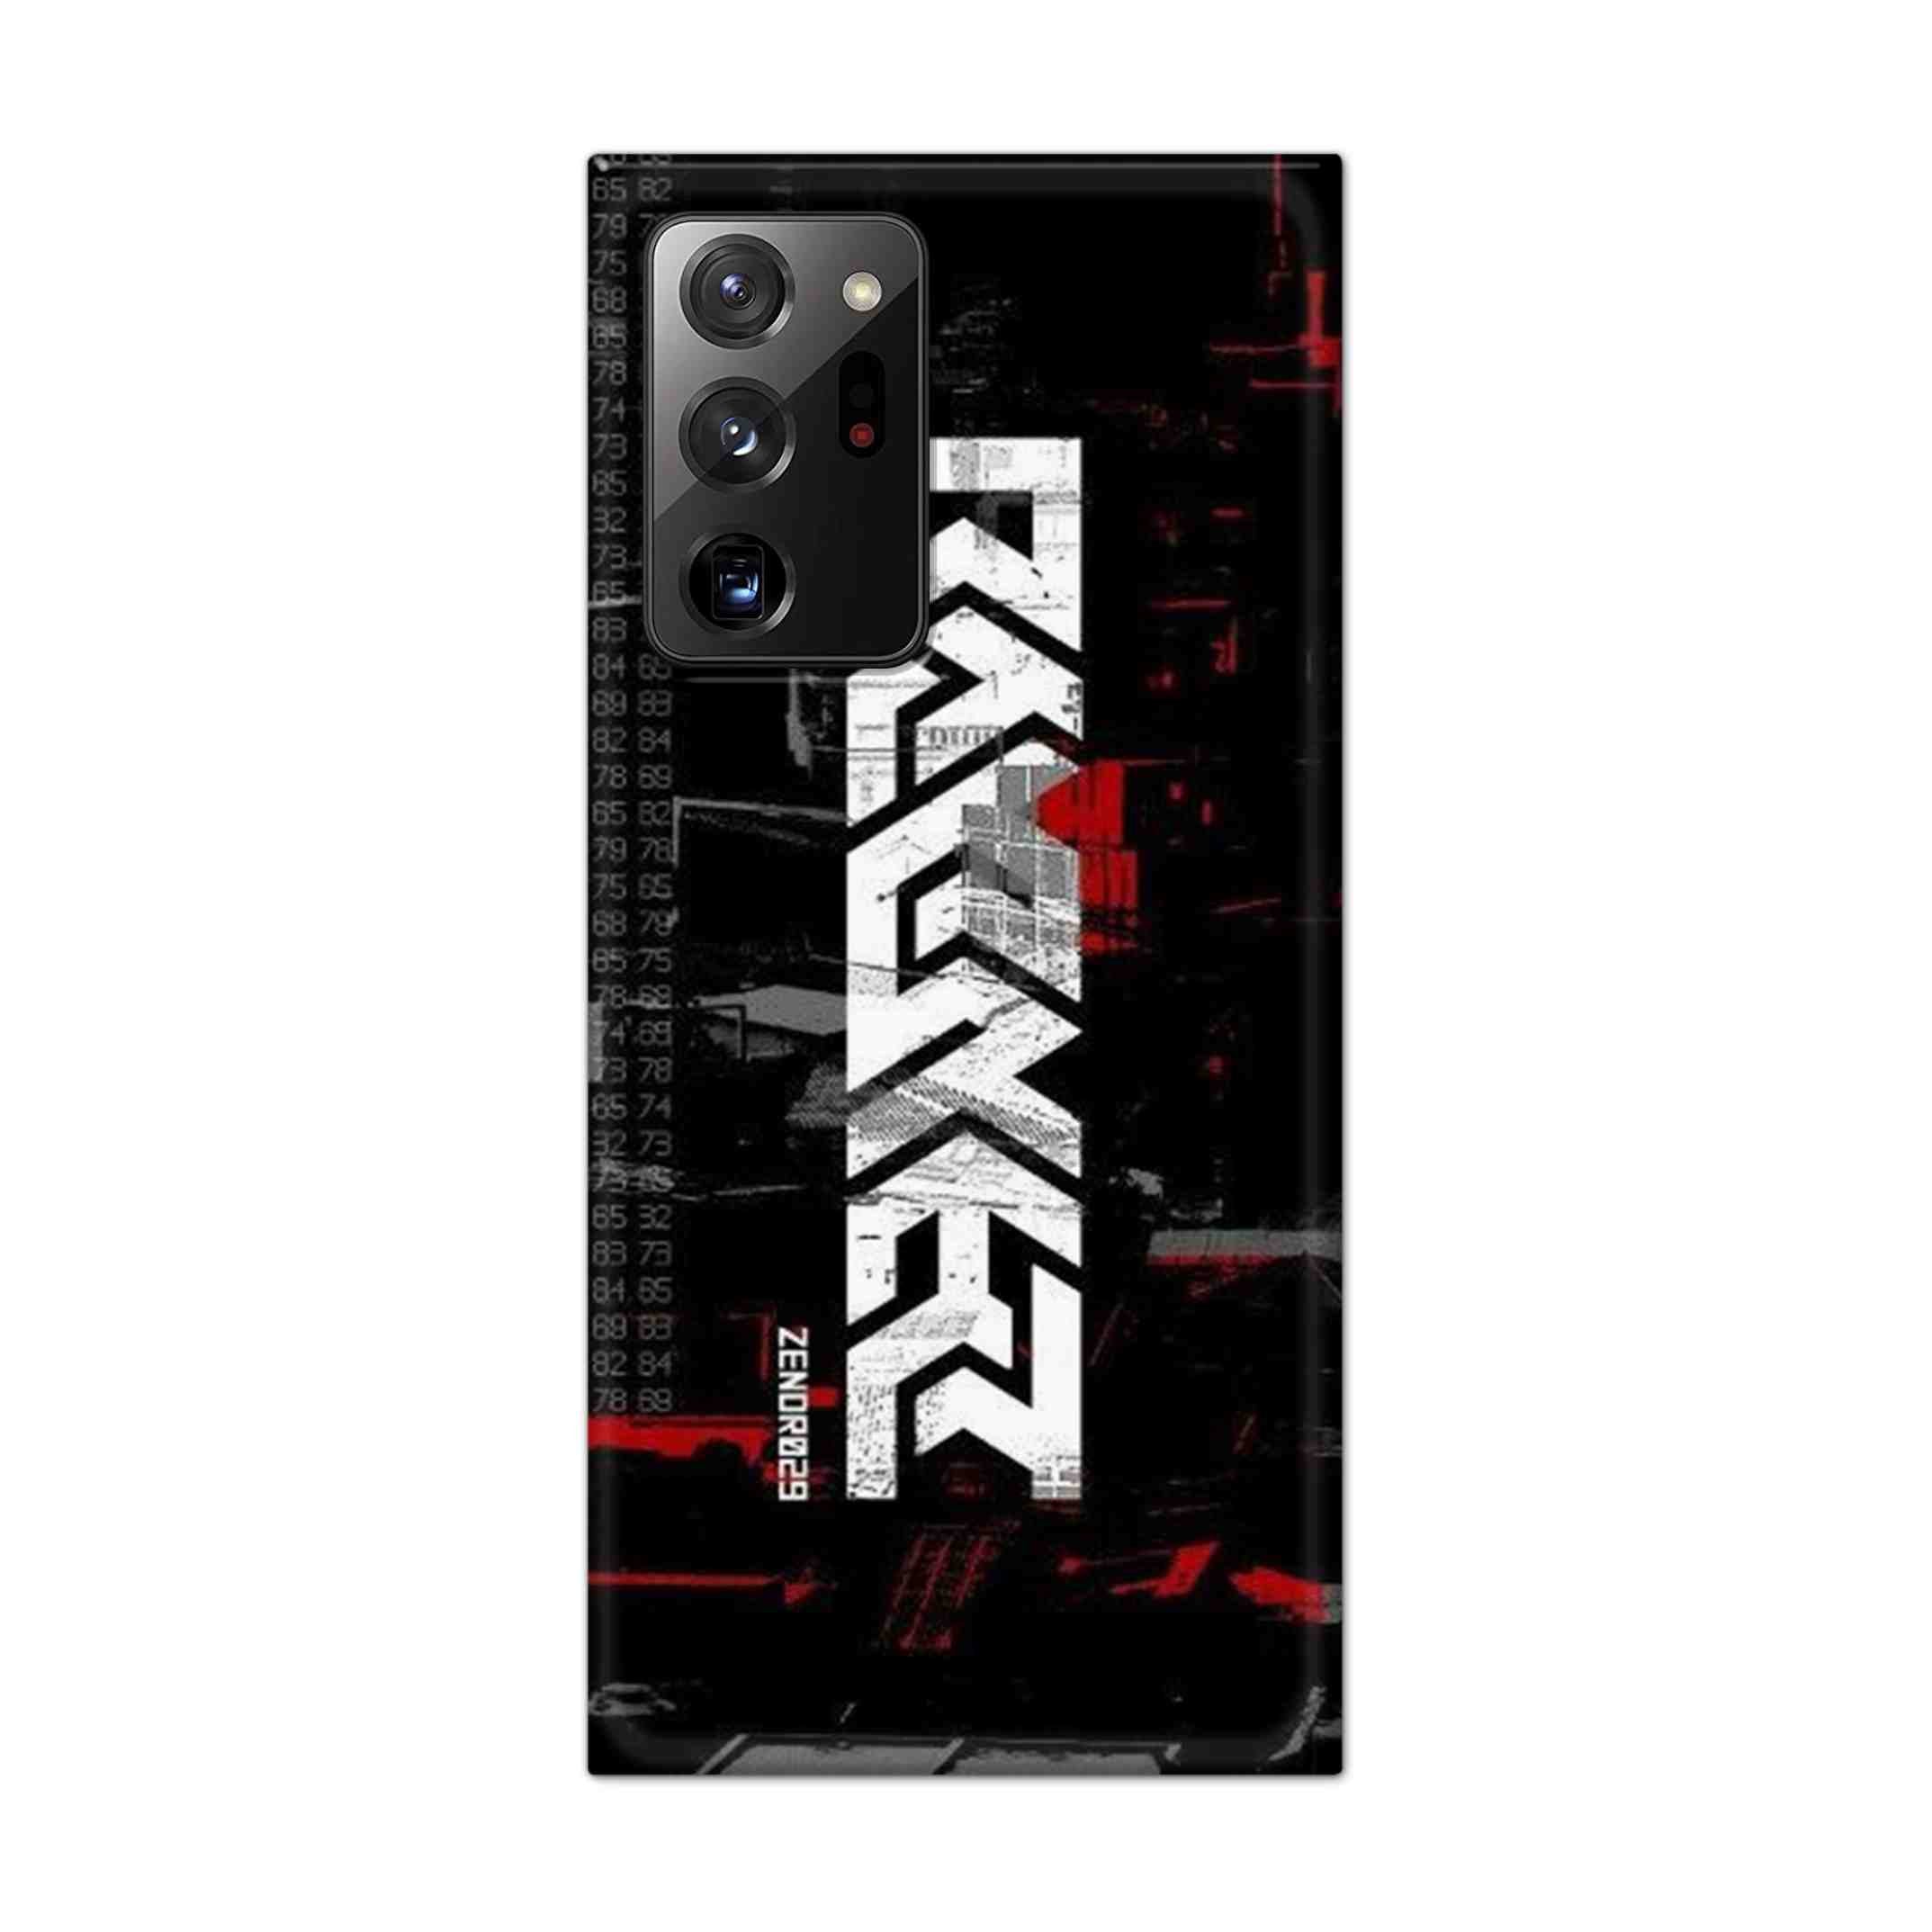 Buy Raxer Hard Back Mobile Phone Case Cover For Samsung Galaxy Note 20 Ultra Online